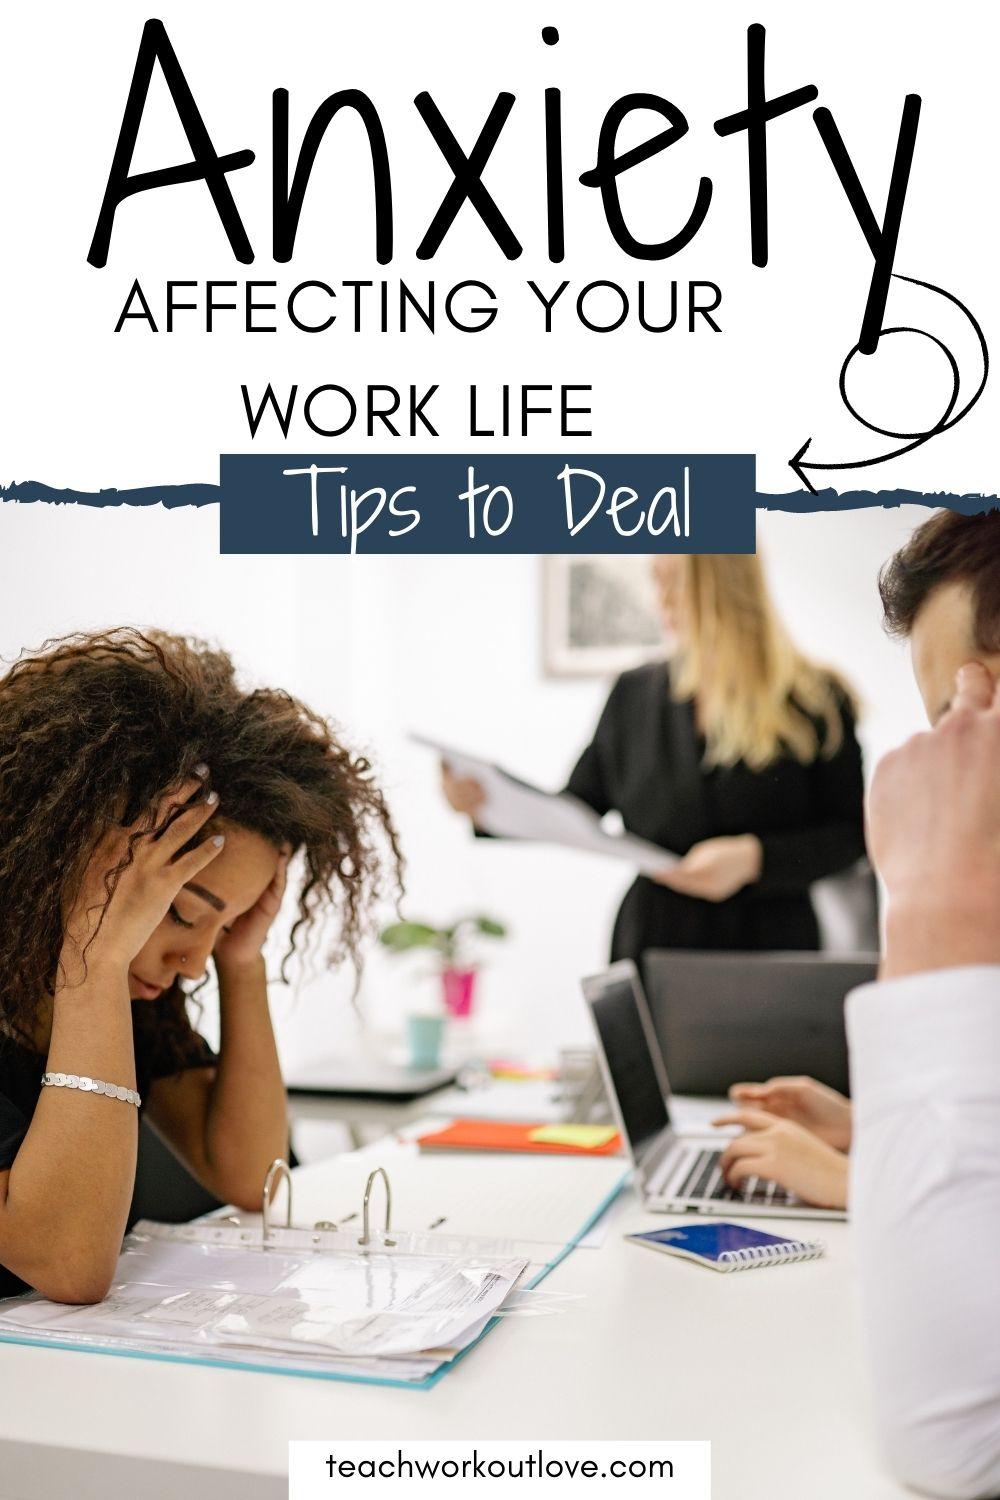 No one wants anxiety to affect their lives so much to the point that their work-life is ruined. Imagine all the years of work you put into your career only to be destroyed by anxiety that won't go away. So it's obvious that you need to take care of your anxiety as soon as it occurs. But how can you do that? Read more to learn about this.